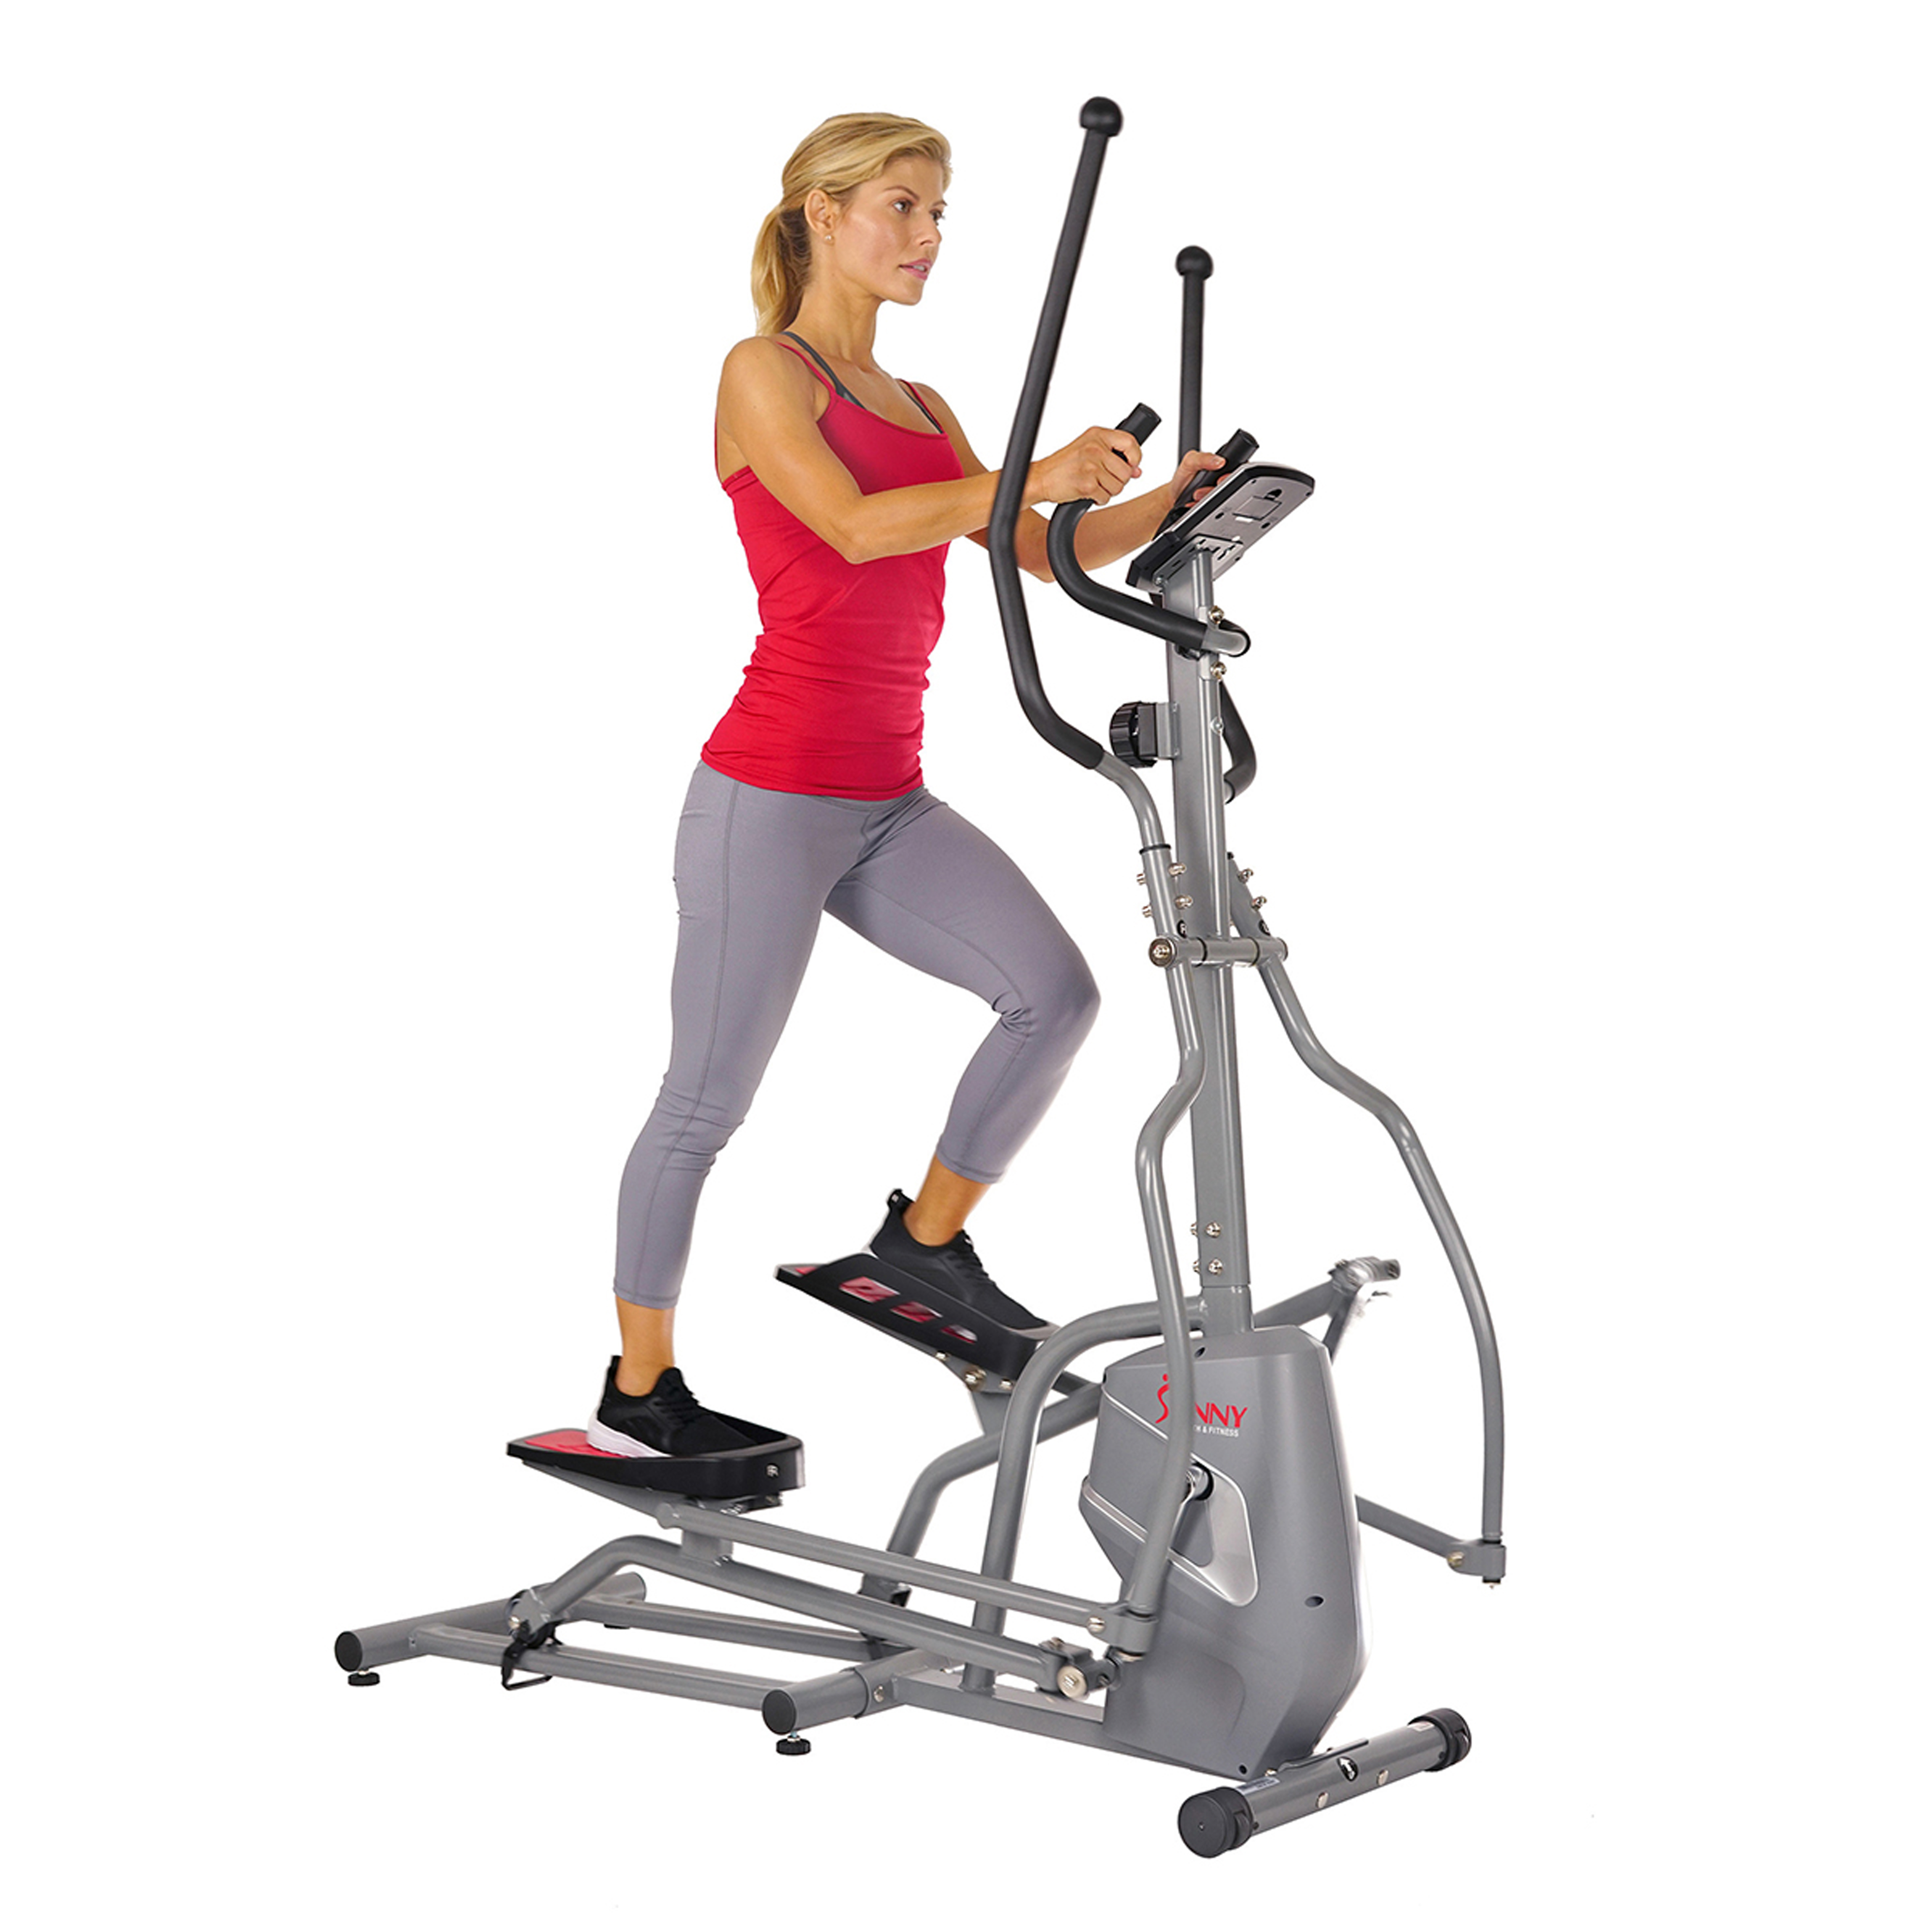 Sunny Health & Fitness Magnetic Exercise Elliptical Stepper Machine, Device Holder, LCD Monitor, Heart Rate Monitoring, SF-E3810 - image 1 of 9